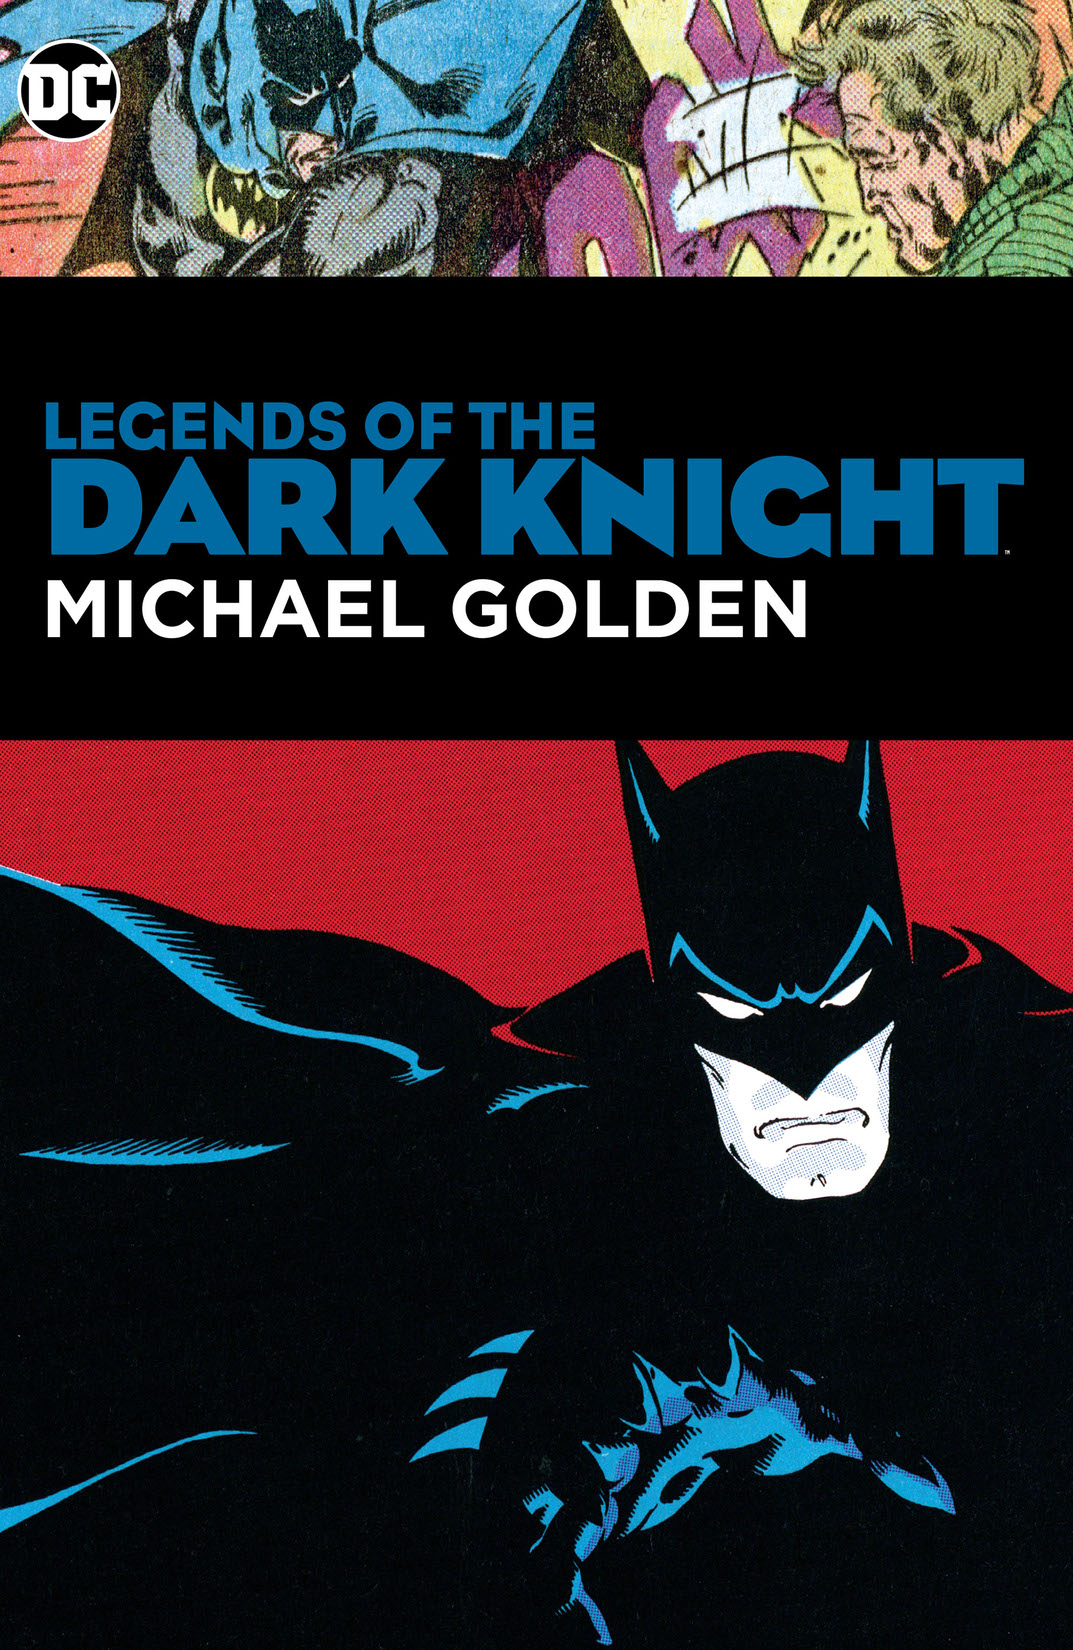 Legends of the Dark Knight: Michael Golden preview images